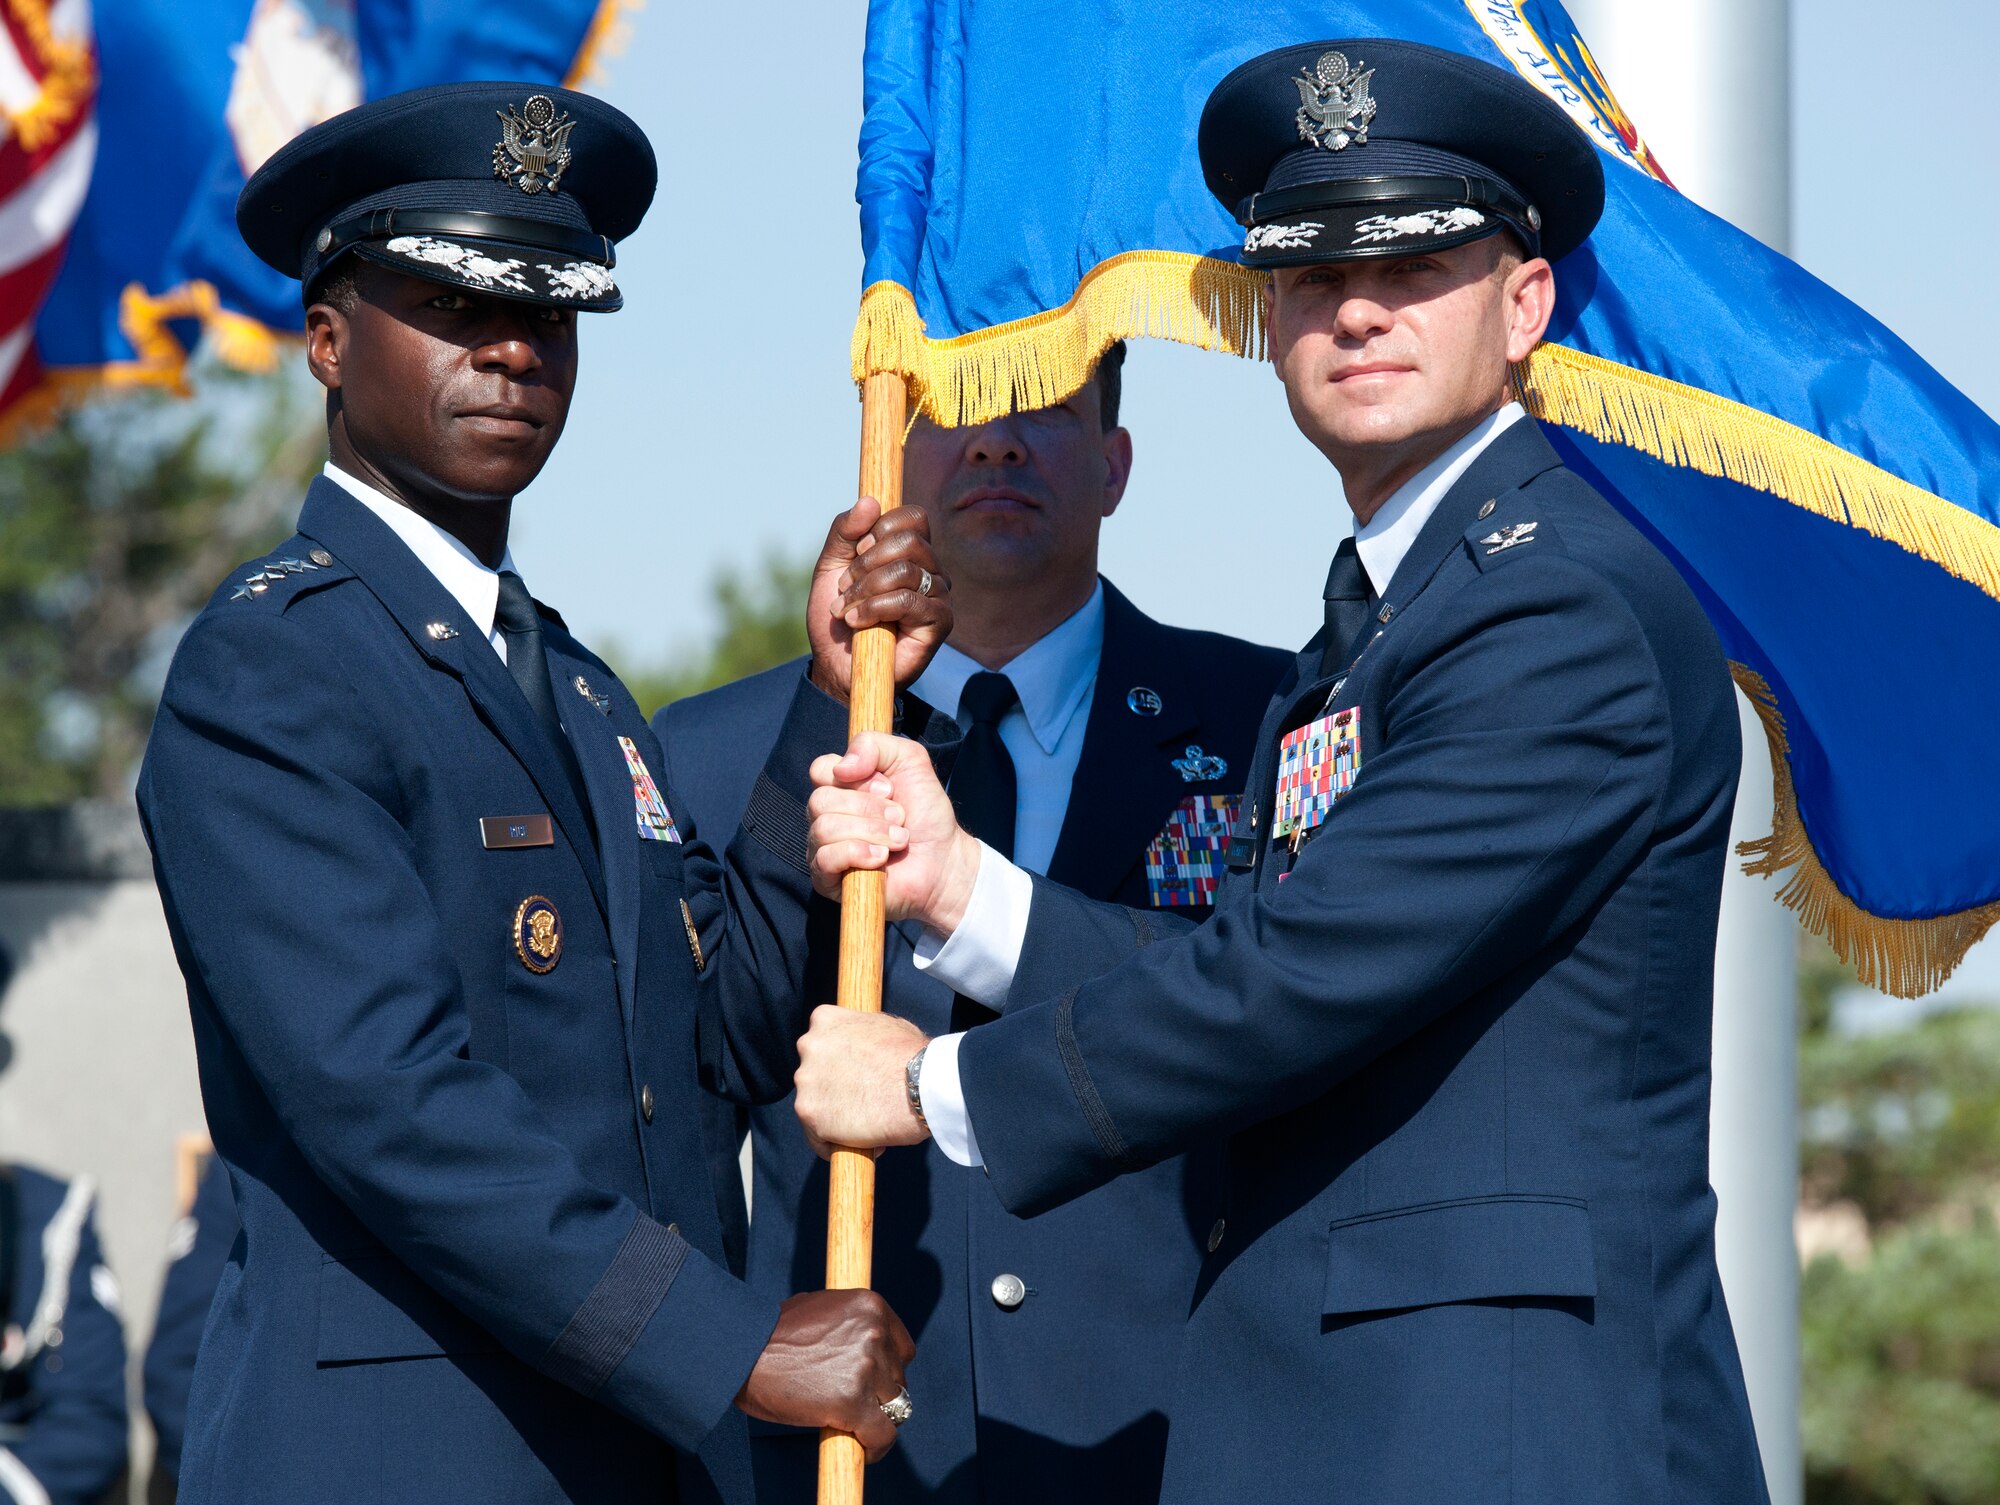 ALTUS AIR FORCE BASE, Okla. – Gen. Edward A. Rice Jr., commander of Air Education and Training Command, retrieves the 97th Air Mobility Wing flag from Col. Anthony B. Krawietz, 97th AMW commander, as part of the 97th AMW change of command ceremony, held at Wings of Freedom Park, June 27. Col. Krawietz relinquished command to Col. William A. Spangenthal, incoming 97th AMW commander, in a centuries-old tradition that allows the passing of responsibility from one commander to the next. (U.S. Air Force photo by Senior Airman Jesse Lopez / Released)